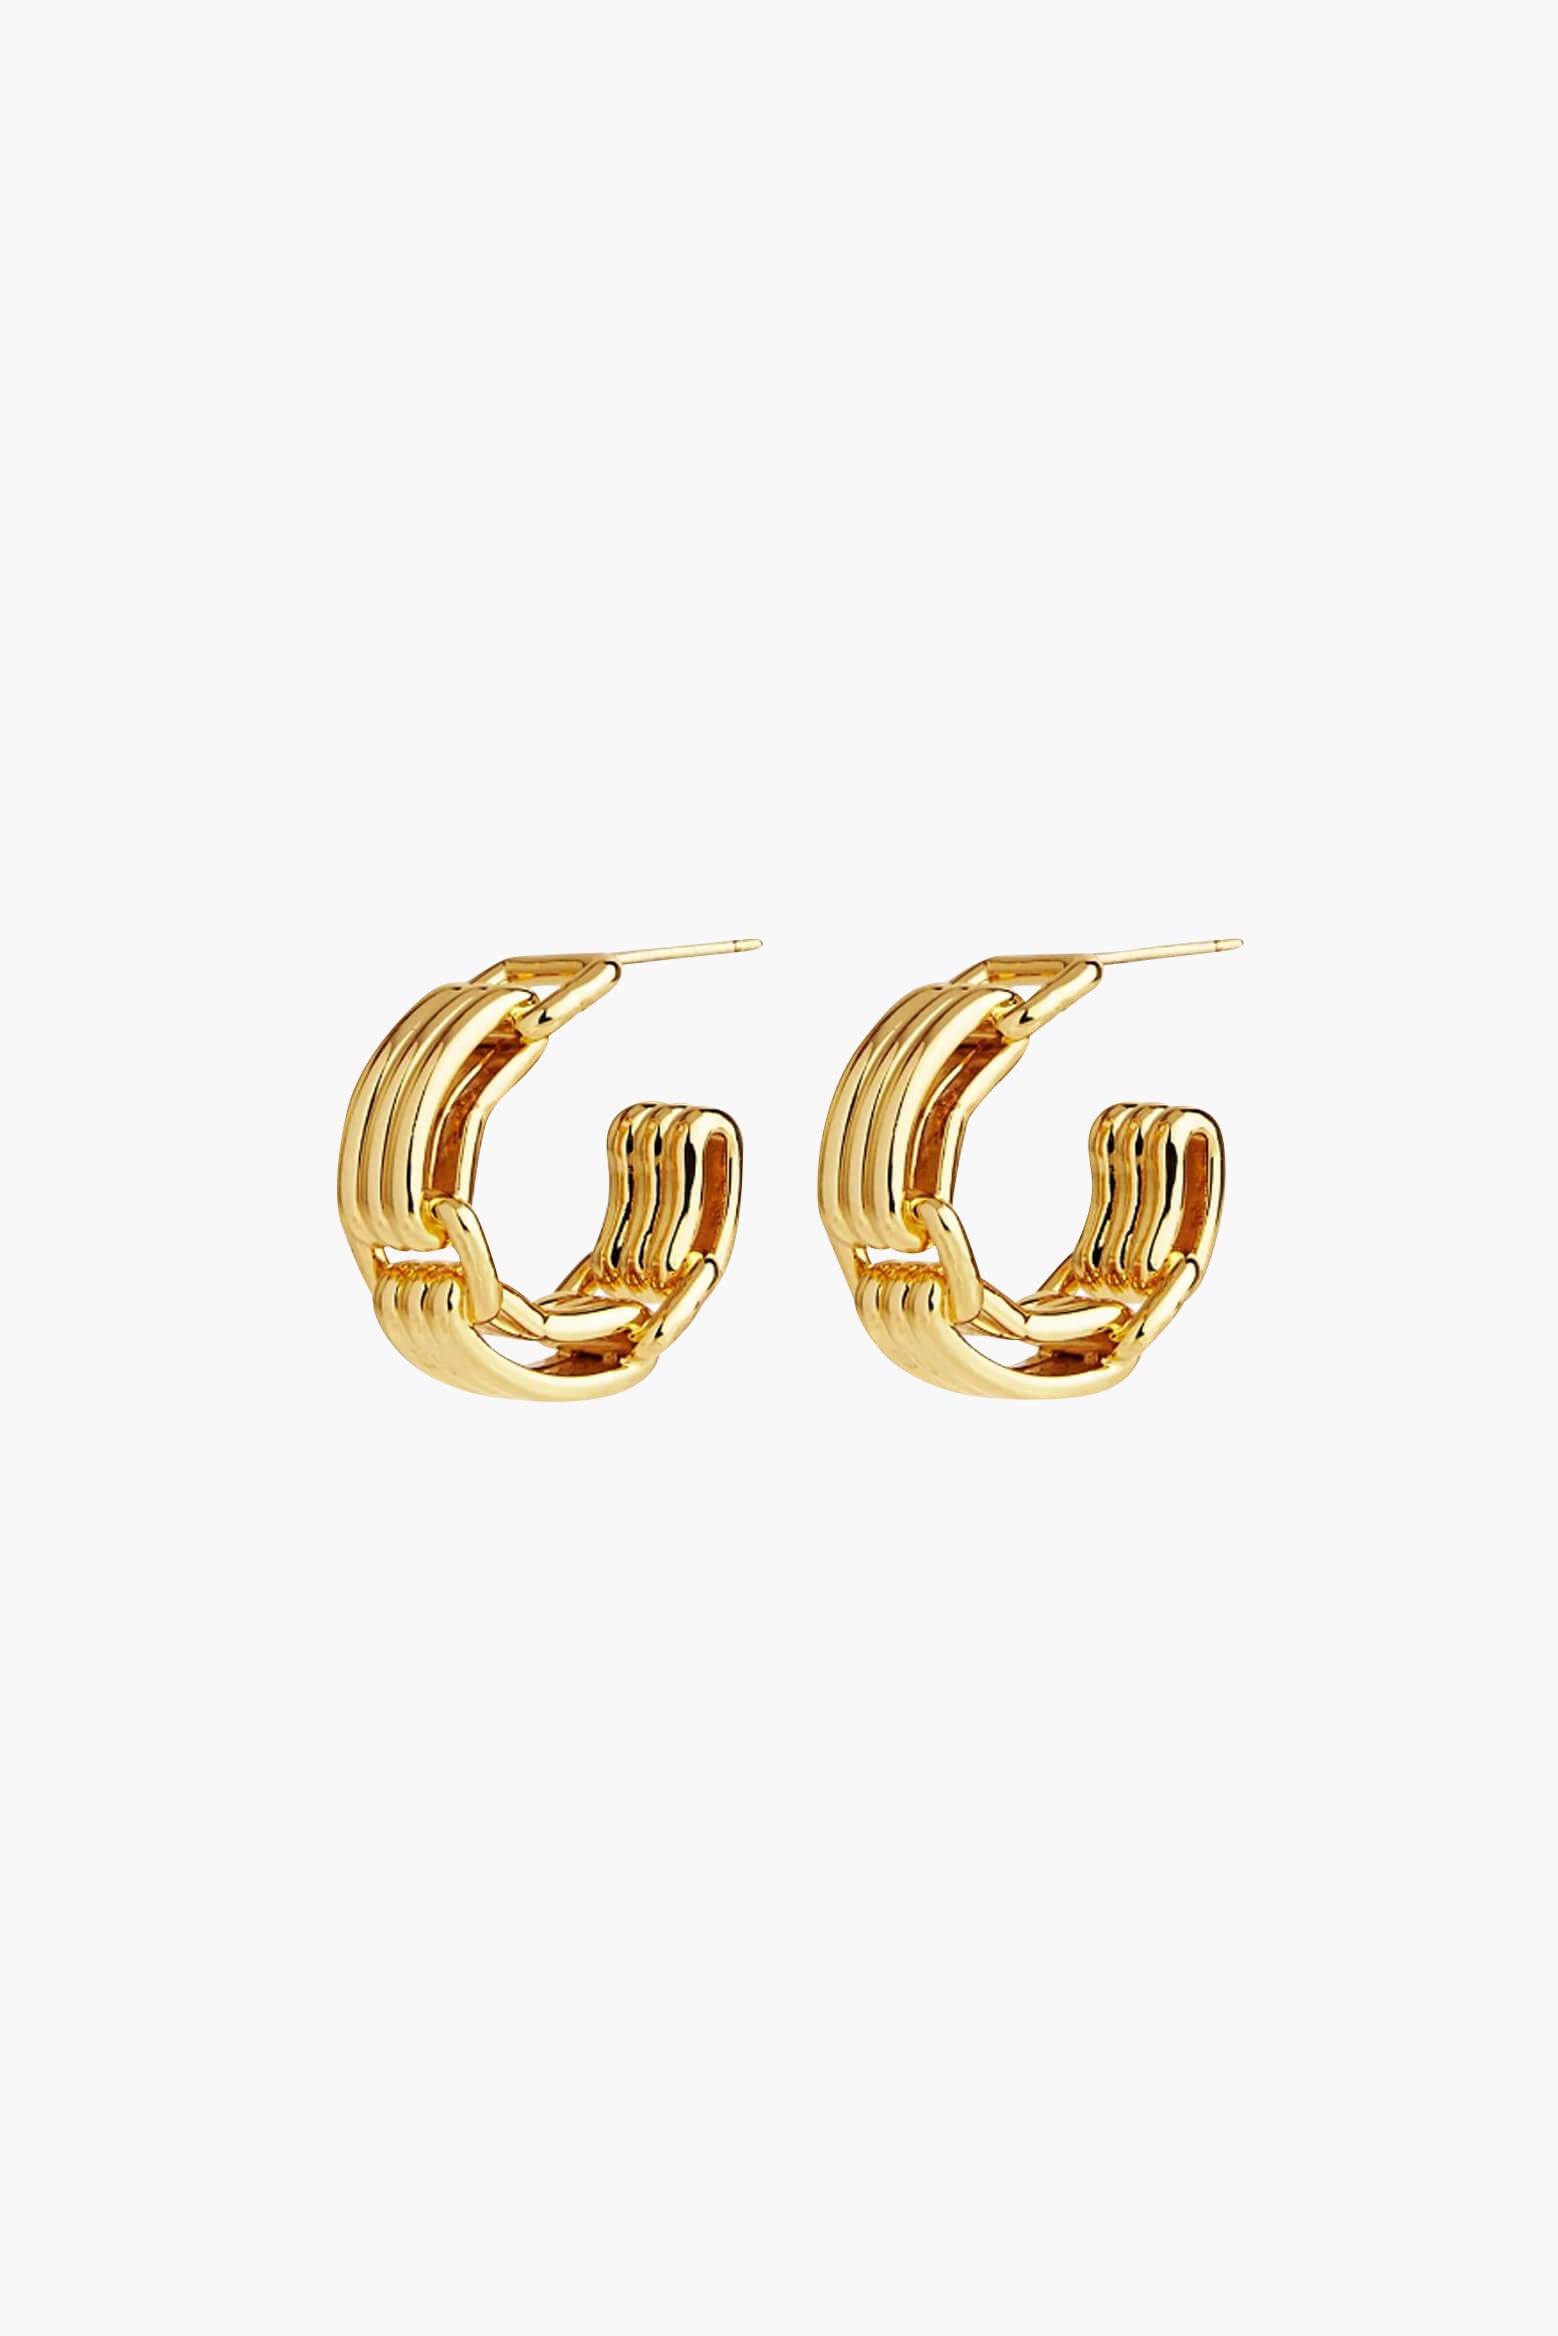 Rylan Flat Link Hoop Earring available at The New Trend